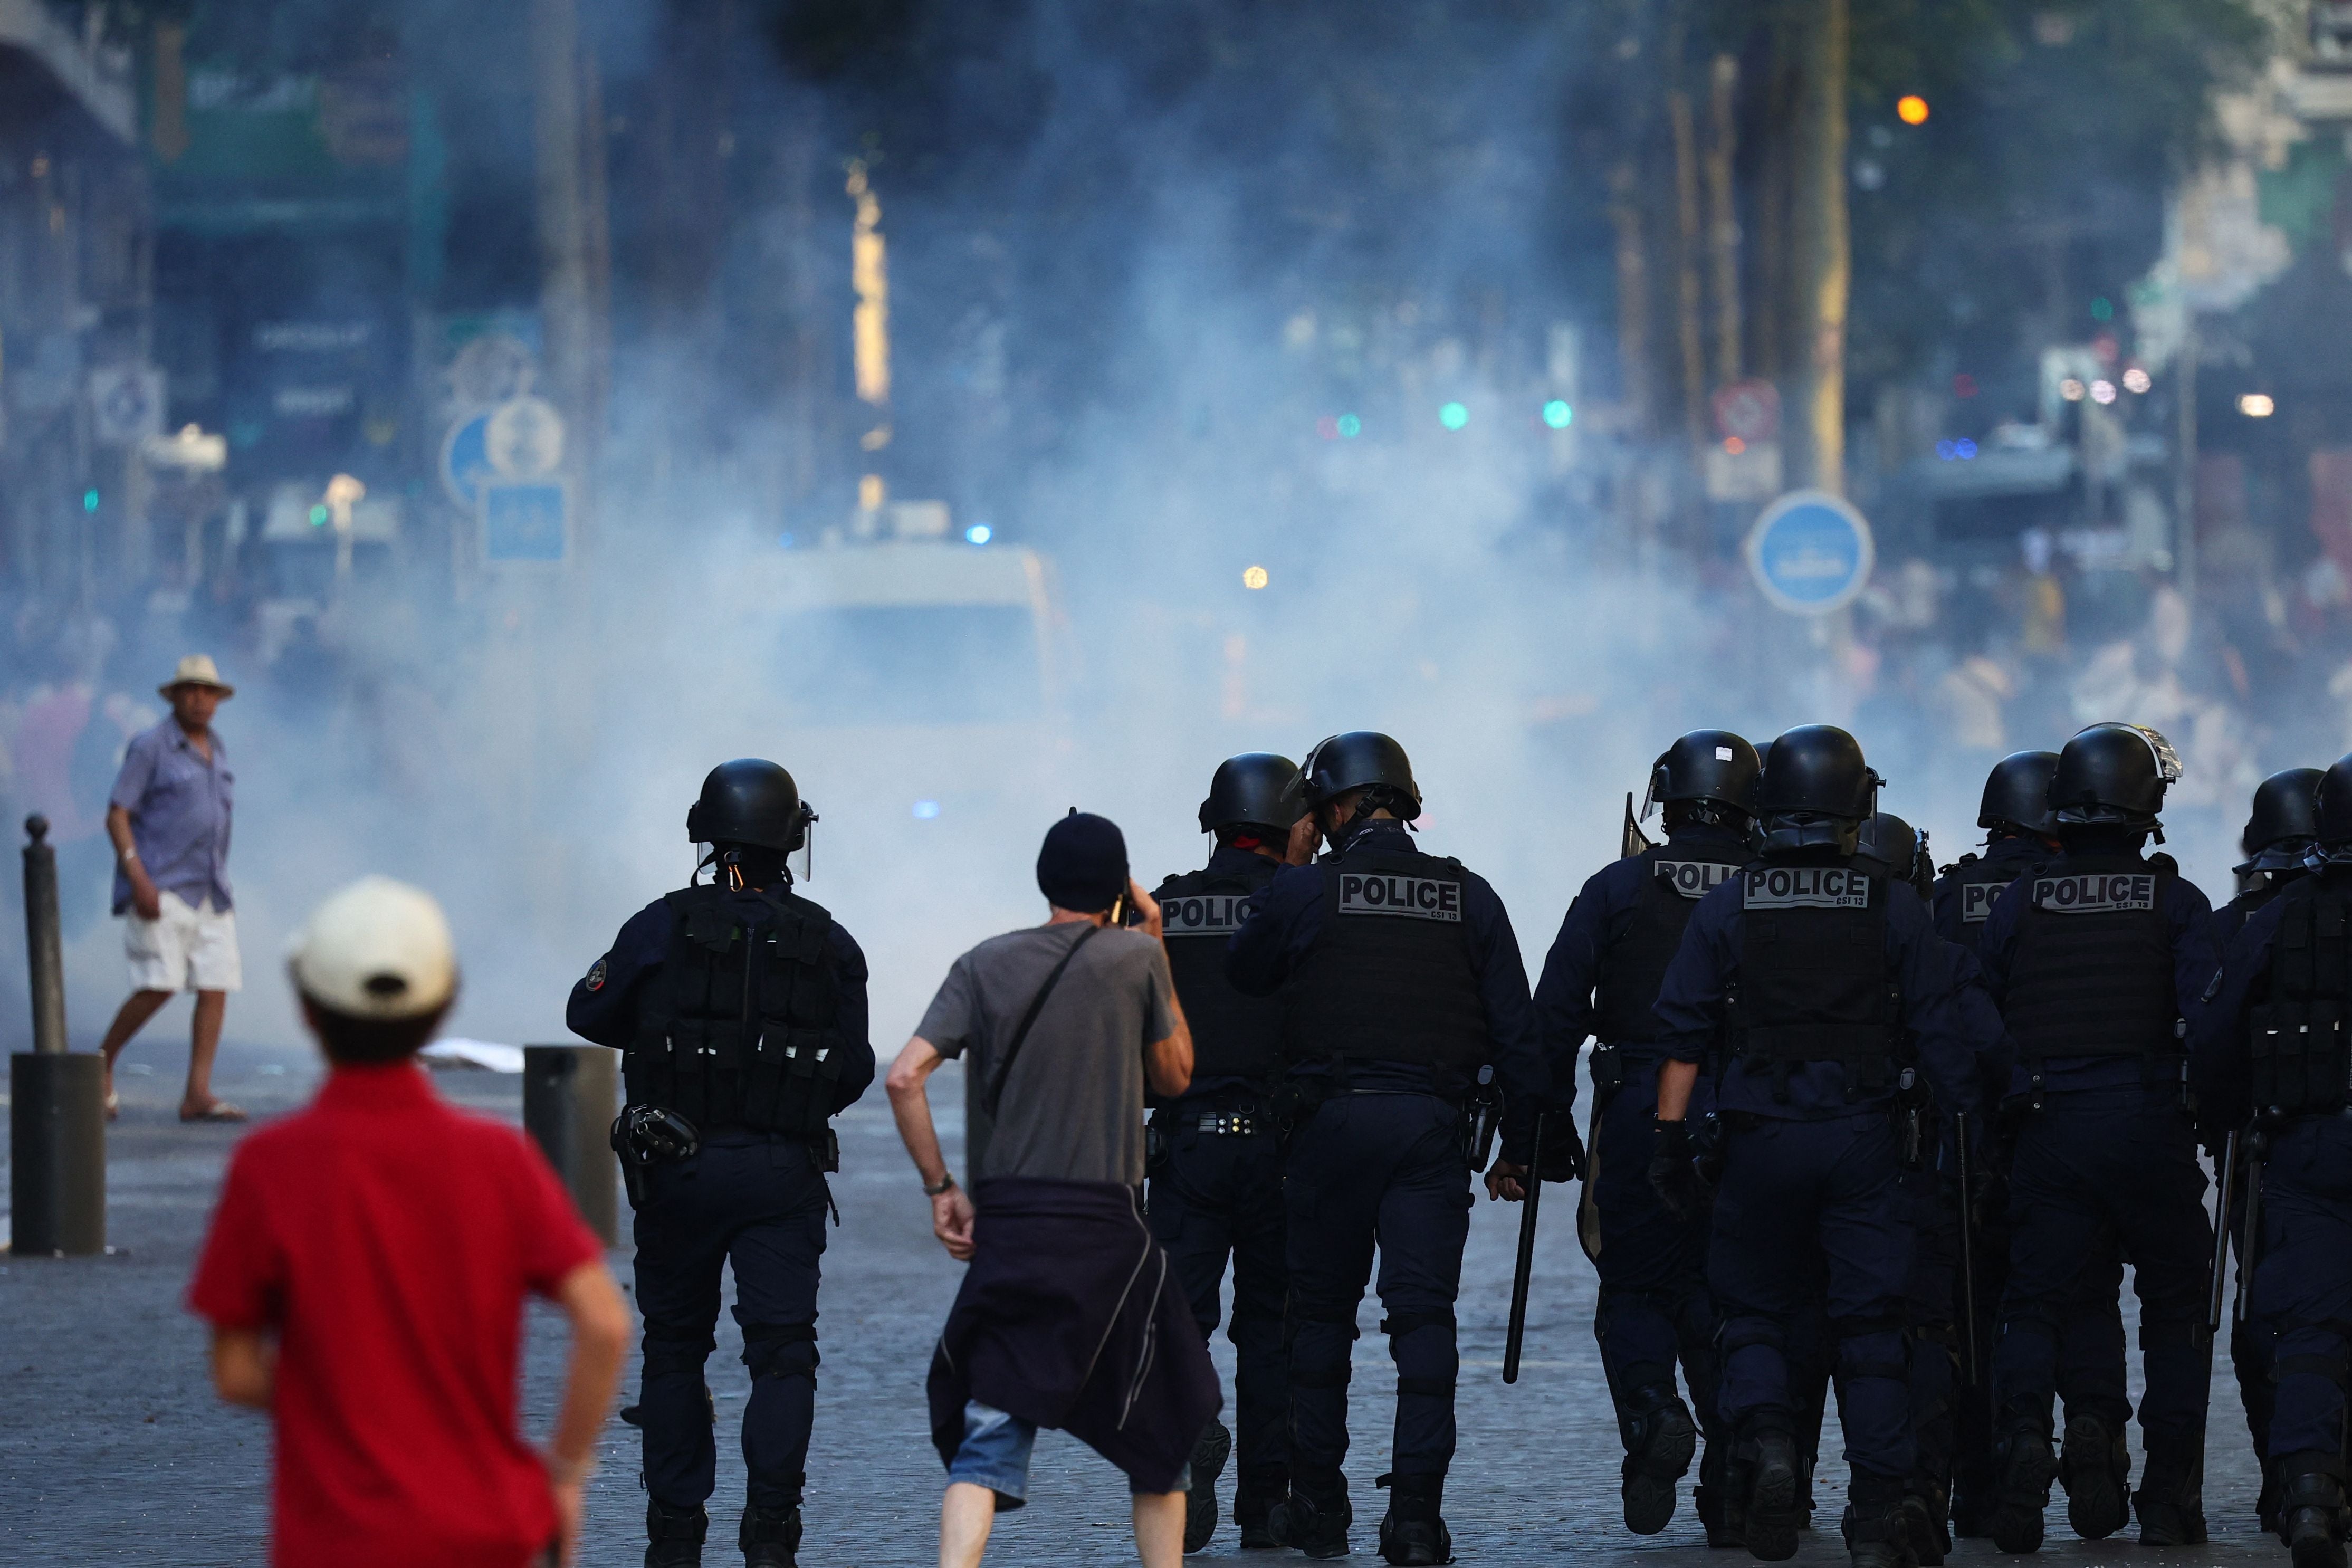 Police officers walk as they try to disperse protesters with tear gas during a demonstration against police in Marseille, southern France